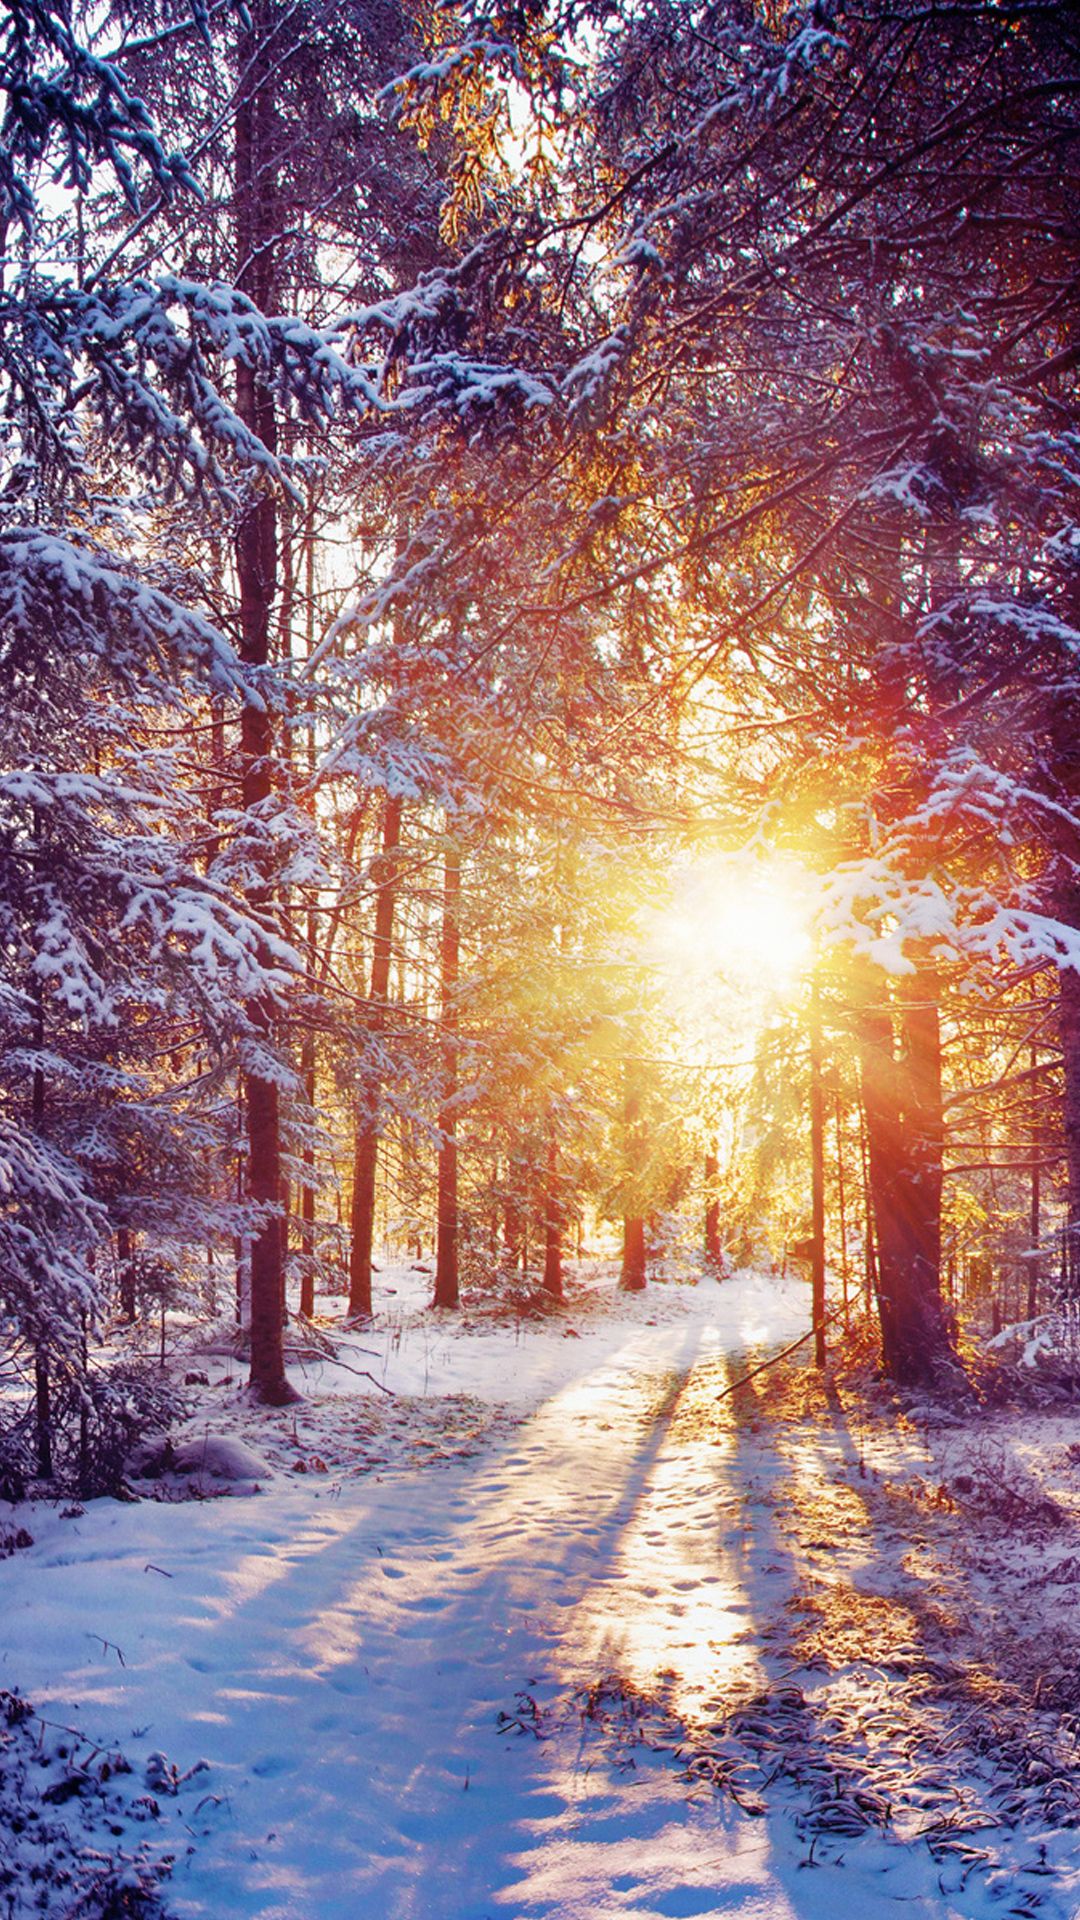 60 BEAUTIFUL NATURE WALLPAPER FREE TO DOWNLOAD Colors of Winter